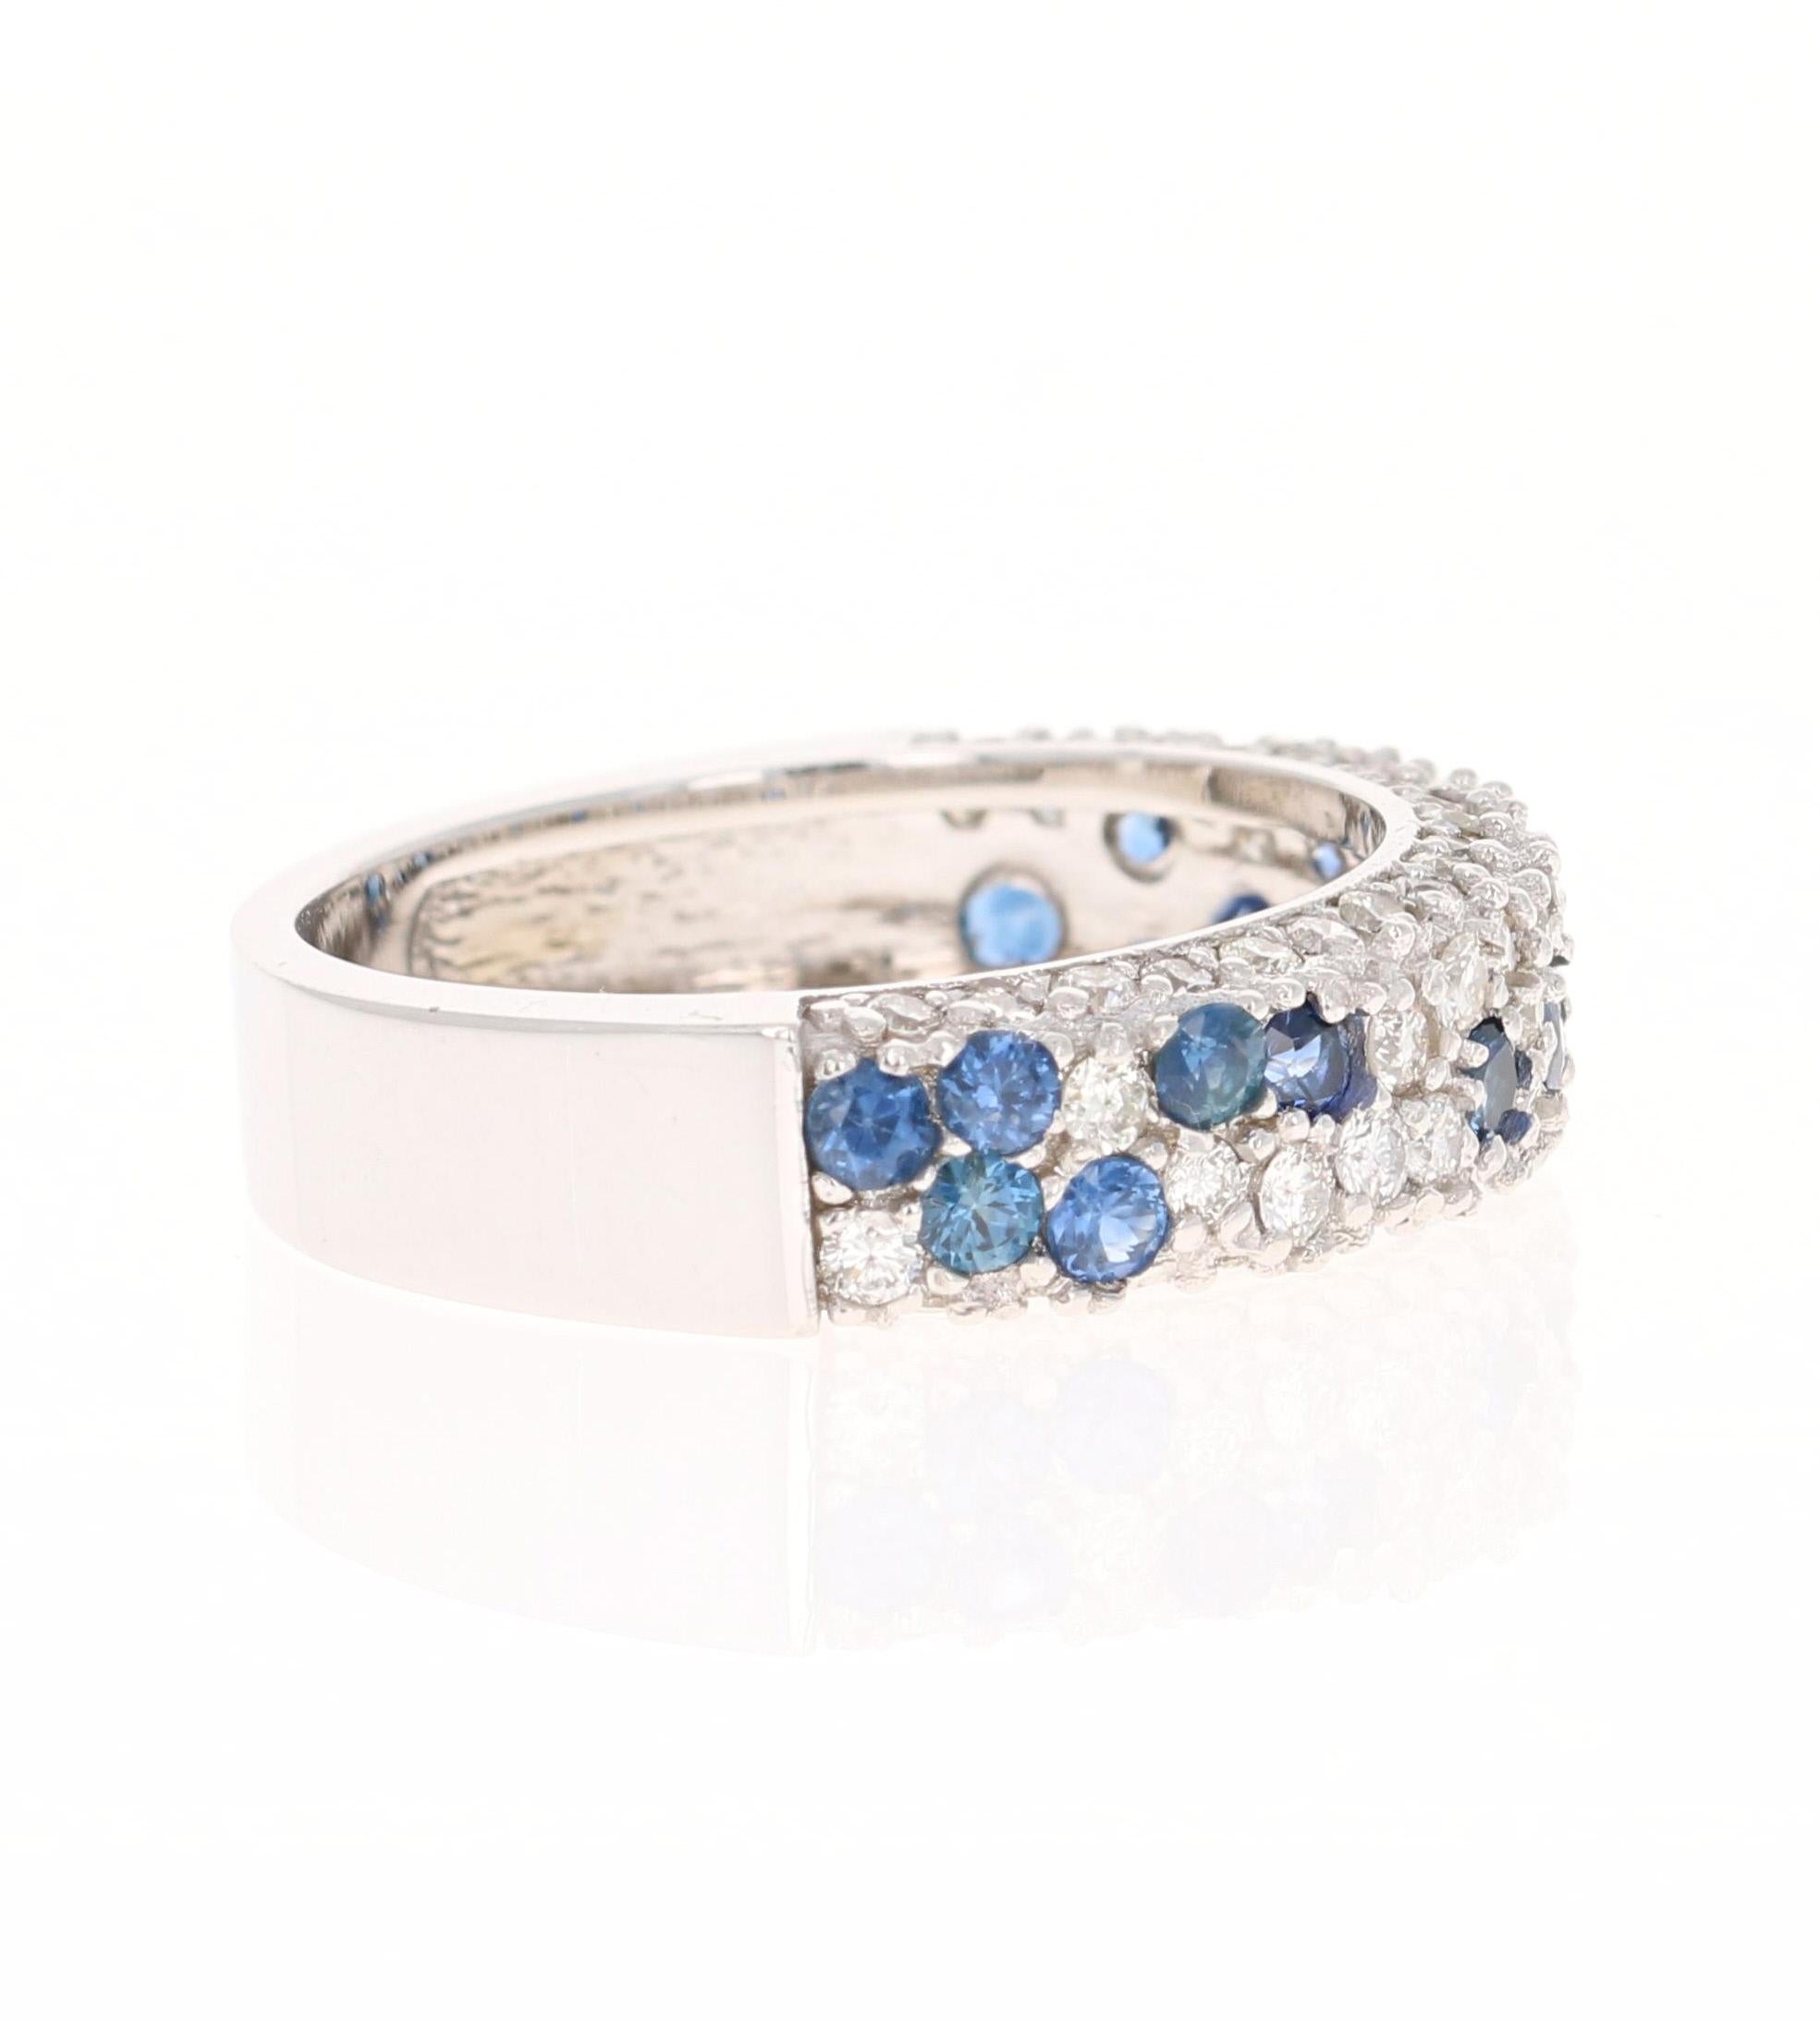 This band has 16 Blue Sapphires that weigh 0.93 carats and 61 Round Cut Diamonds that weigh 0.77 carats. (Clarity: VS Color: H) The total carat weight of the ring is 1.70 carats. 

The ring is designed in 18 Karat White Gold and weighs approximately